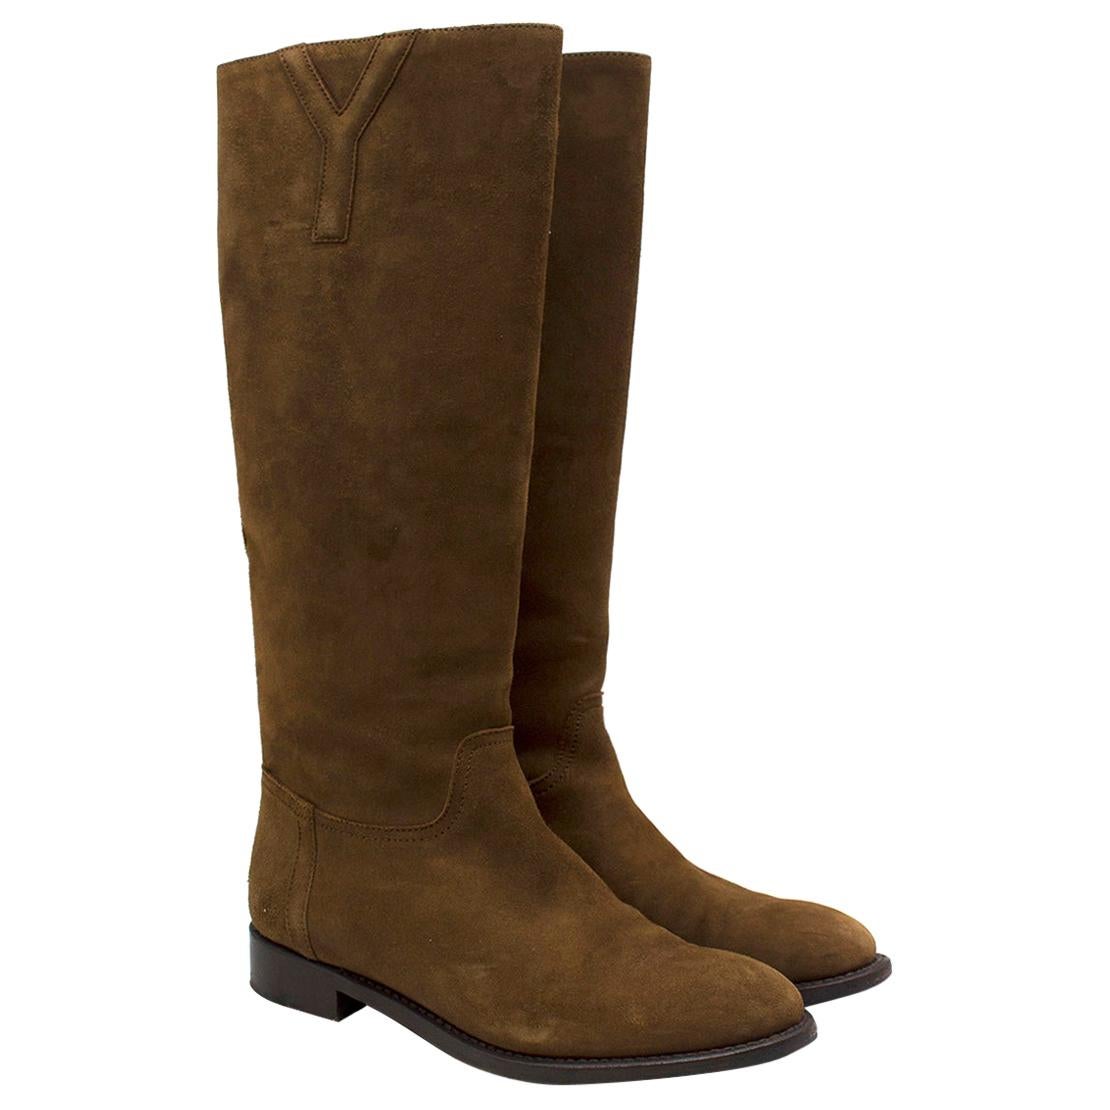 Yves Saint Laurent Brown Suede Tall Boots 37